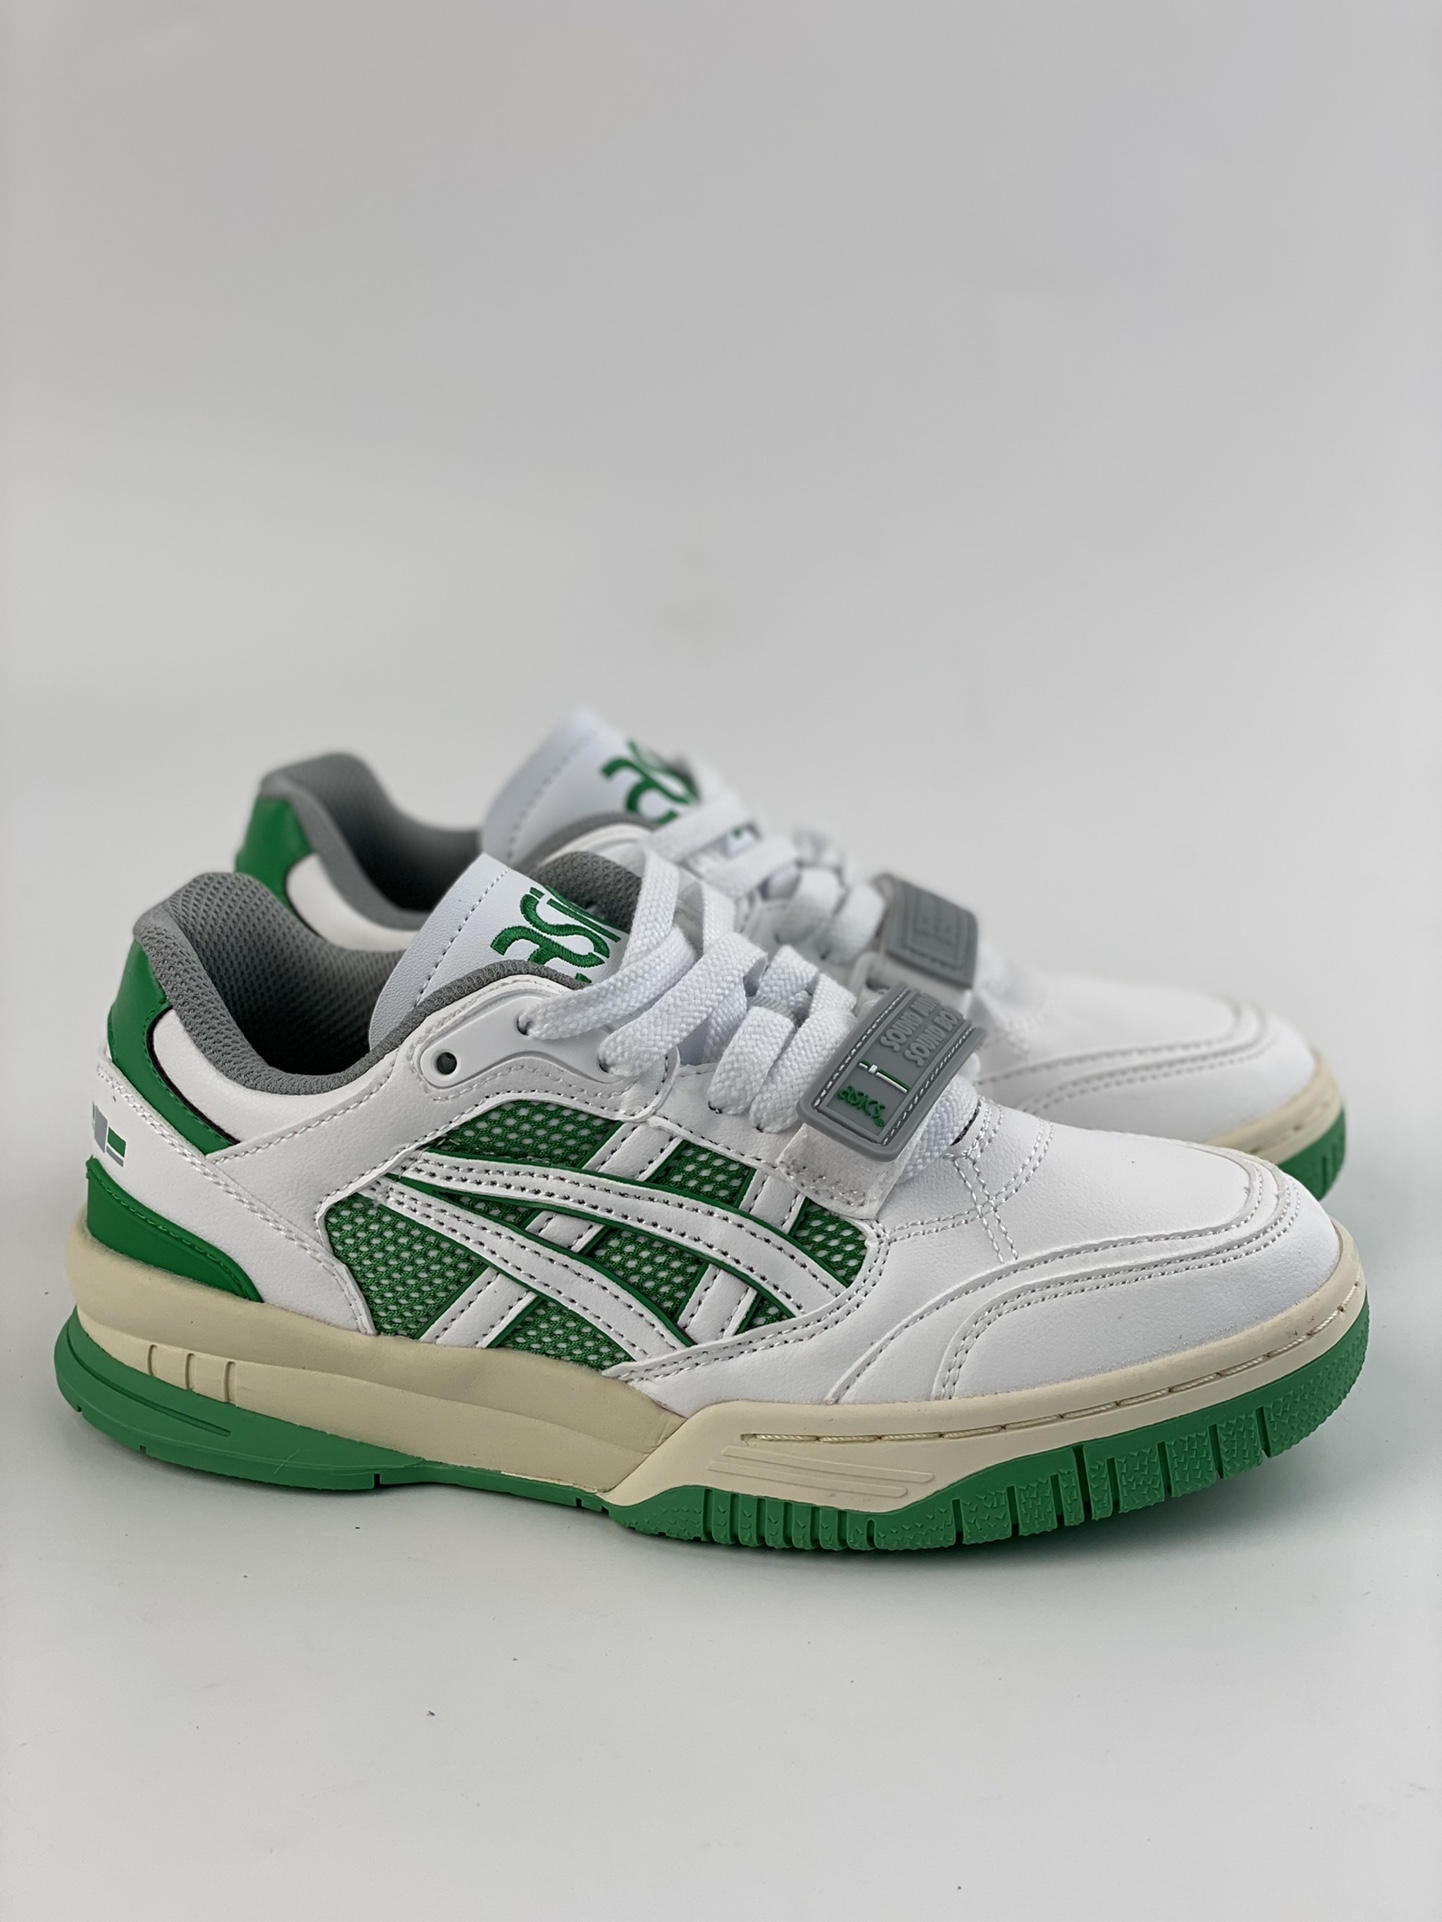 Asics Gel Spotlyte low V2 trend wear-resistant low-top retro basketball shoes 1203A258-104